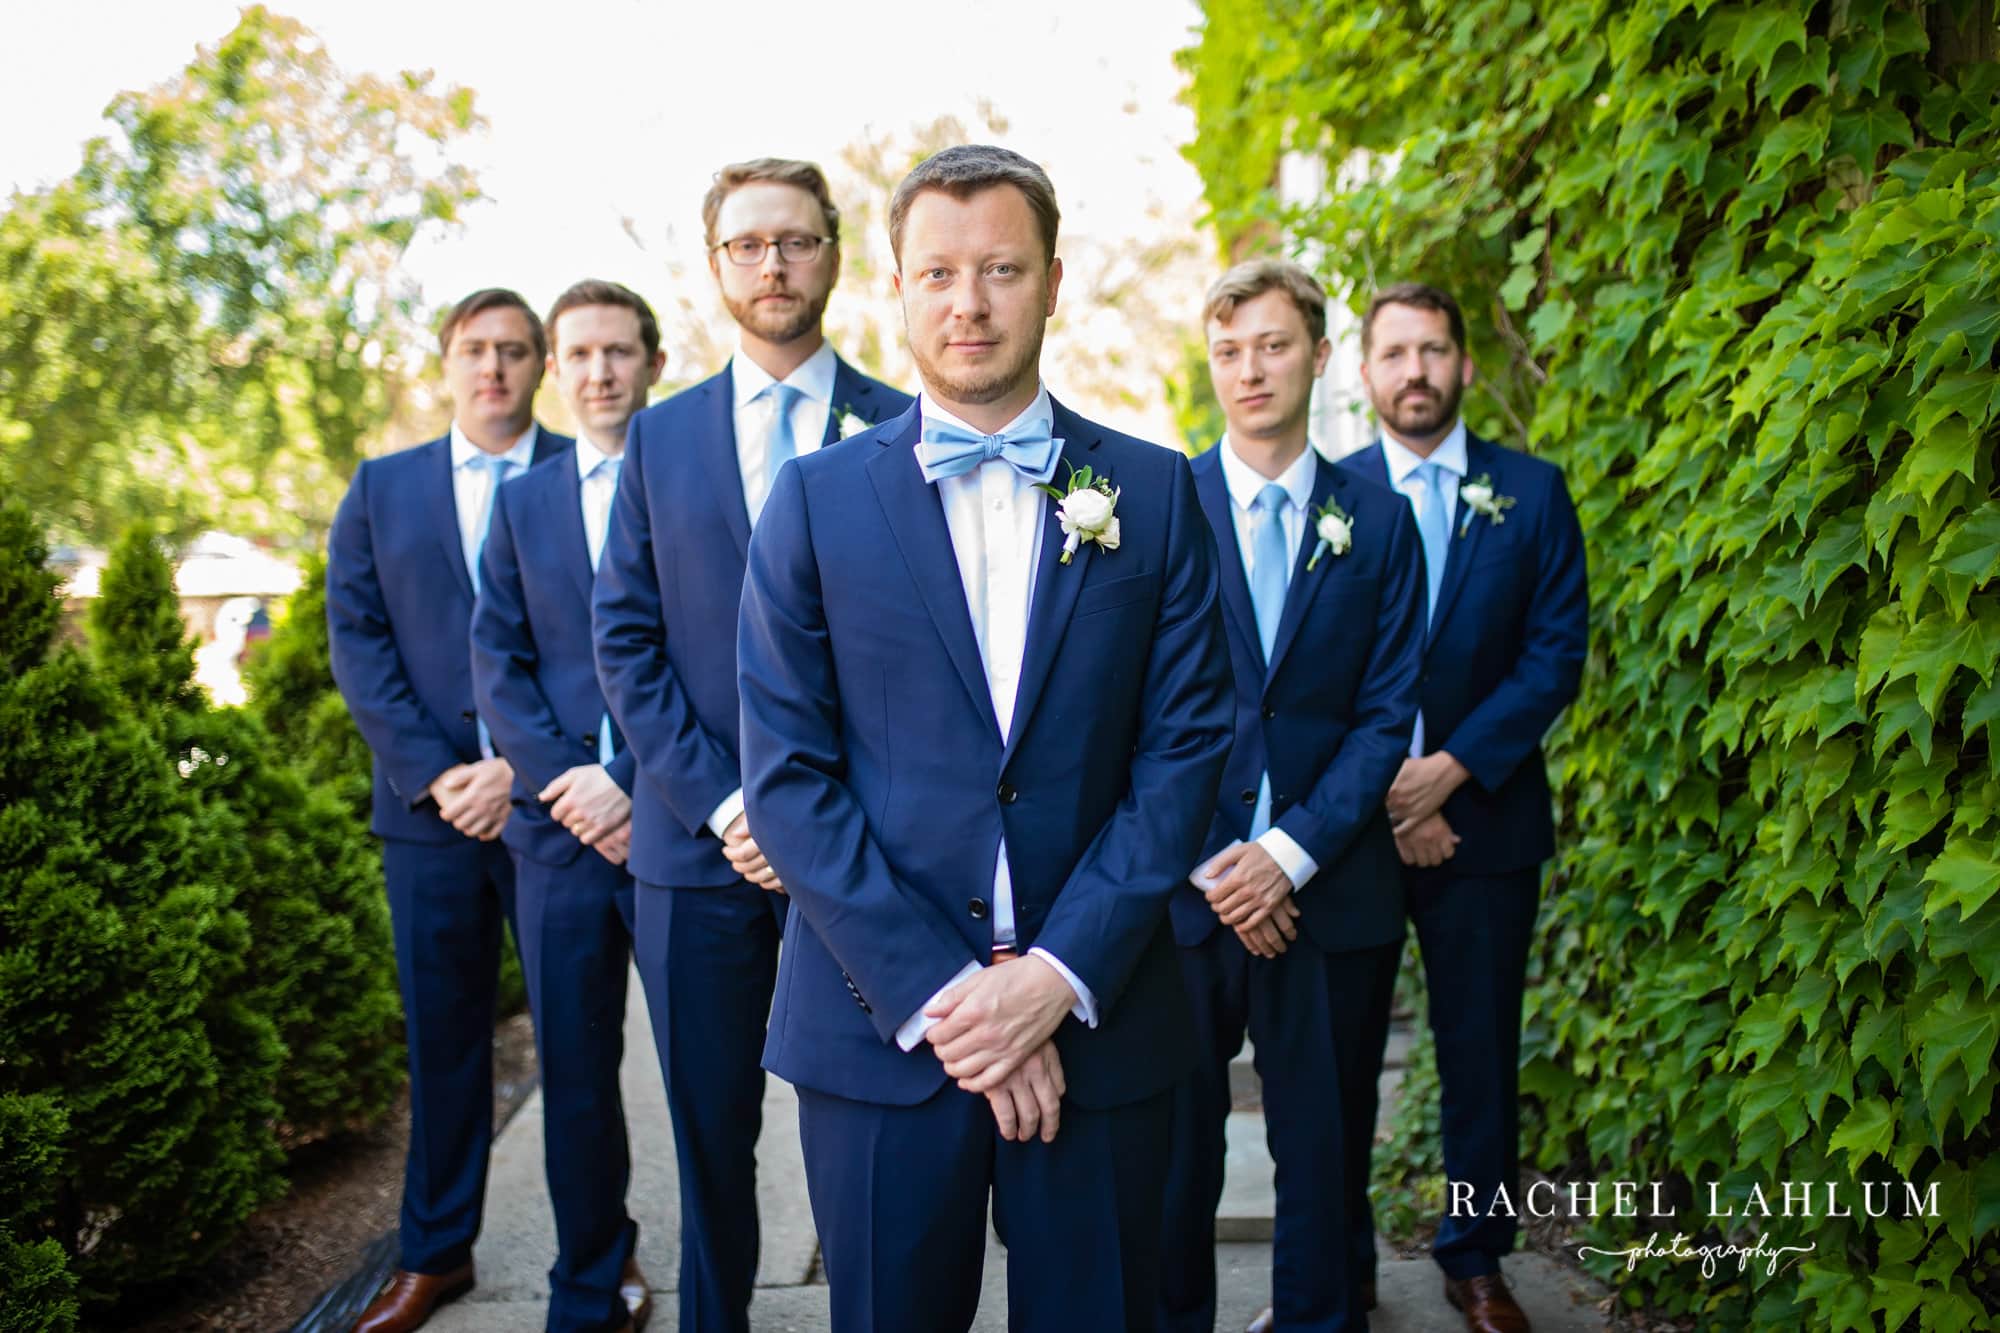 Groom and groomsmen pose in a v-shape in the garden at The Blaisdell Wedding Venue.